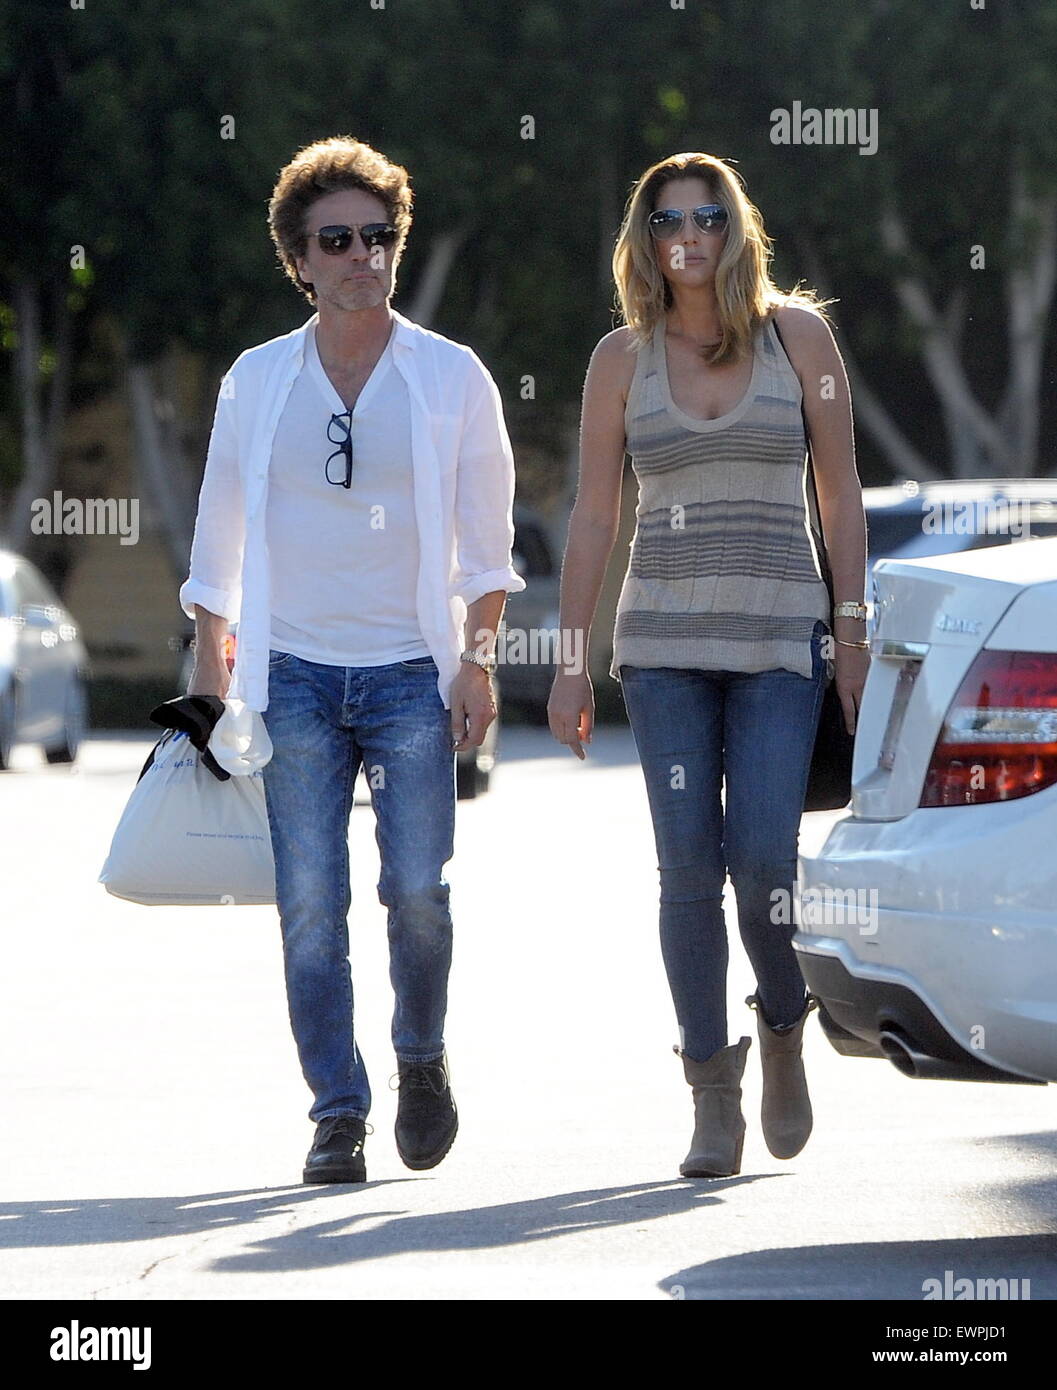 Model Daisy Fuentes flaunts her famous curves at the age of 48 while out shopping with her new boyfriend singer Richard Marx. The new couple were seen holding hands while shopping at Urban Outfitters in Studio City. Daisy also seen checking out her new yellow diamond ring on her wedding ring finger. Richard who recently split from his wife of 25 years last year has been linked to daisy since then.  Featuring: Daisy Fuentes, Richard Marx Where: Studio City, California, United States When: 28 Apr 2015 C Stock Photo